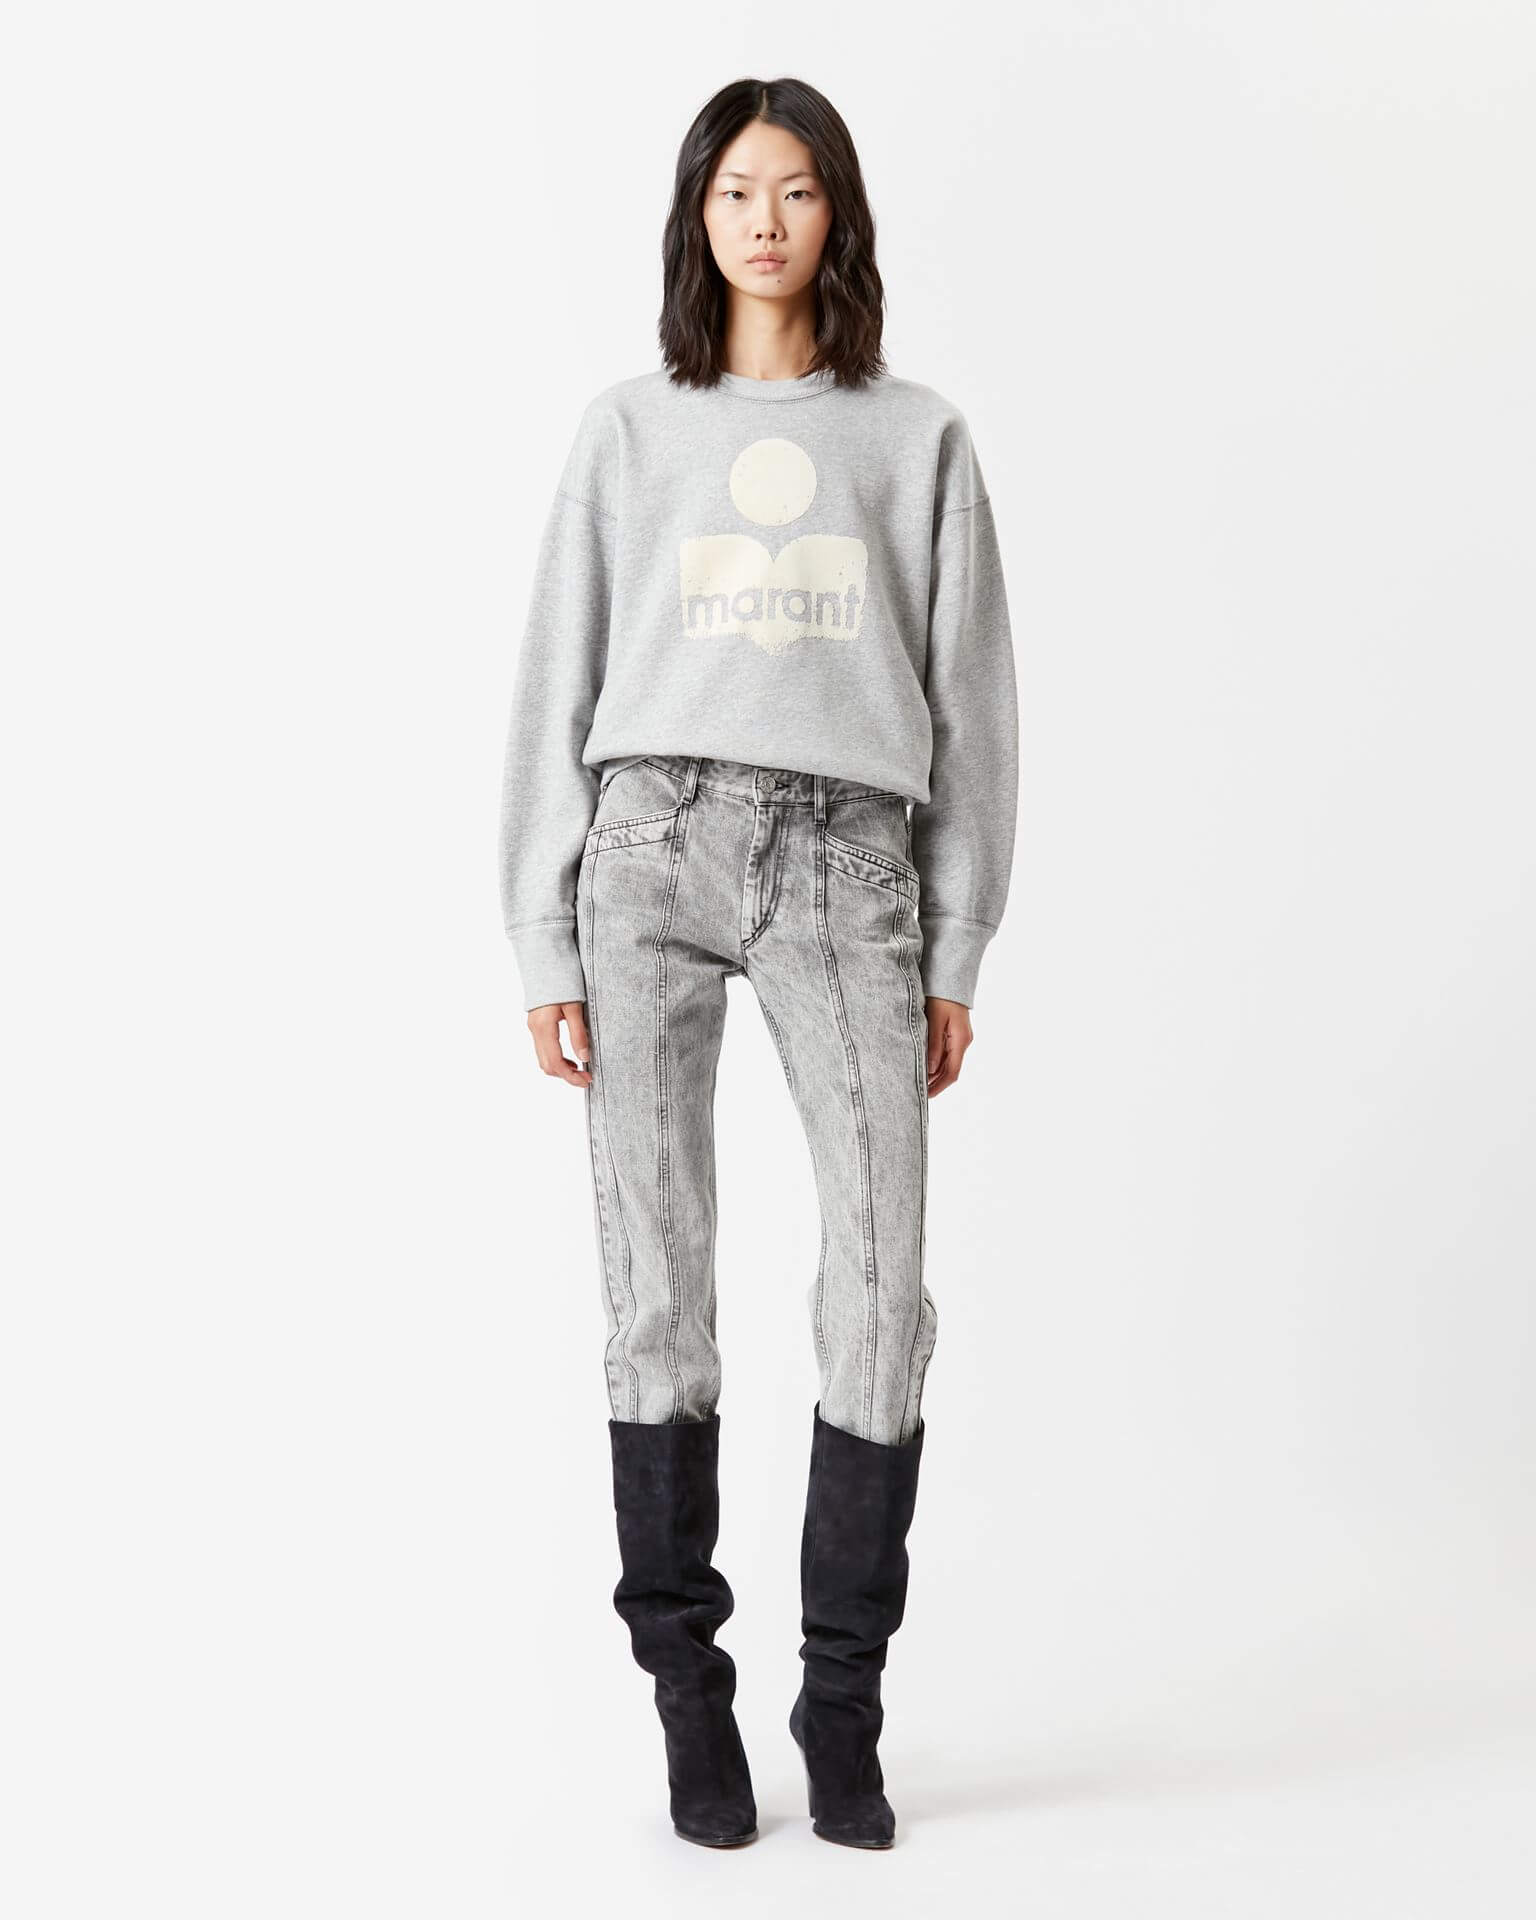 Isabel Marant Etoile Mobyli Sweatshirt in Grey available at TNT The New Trend Australia. Free shipping on orders over $300 AUD.